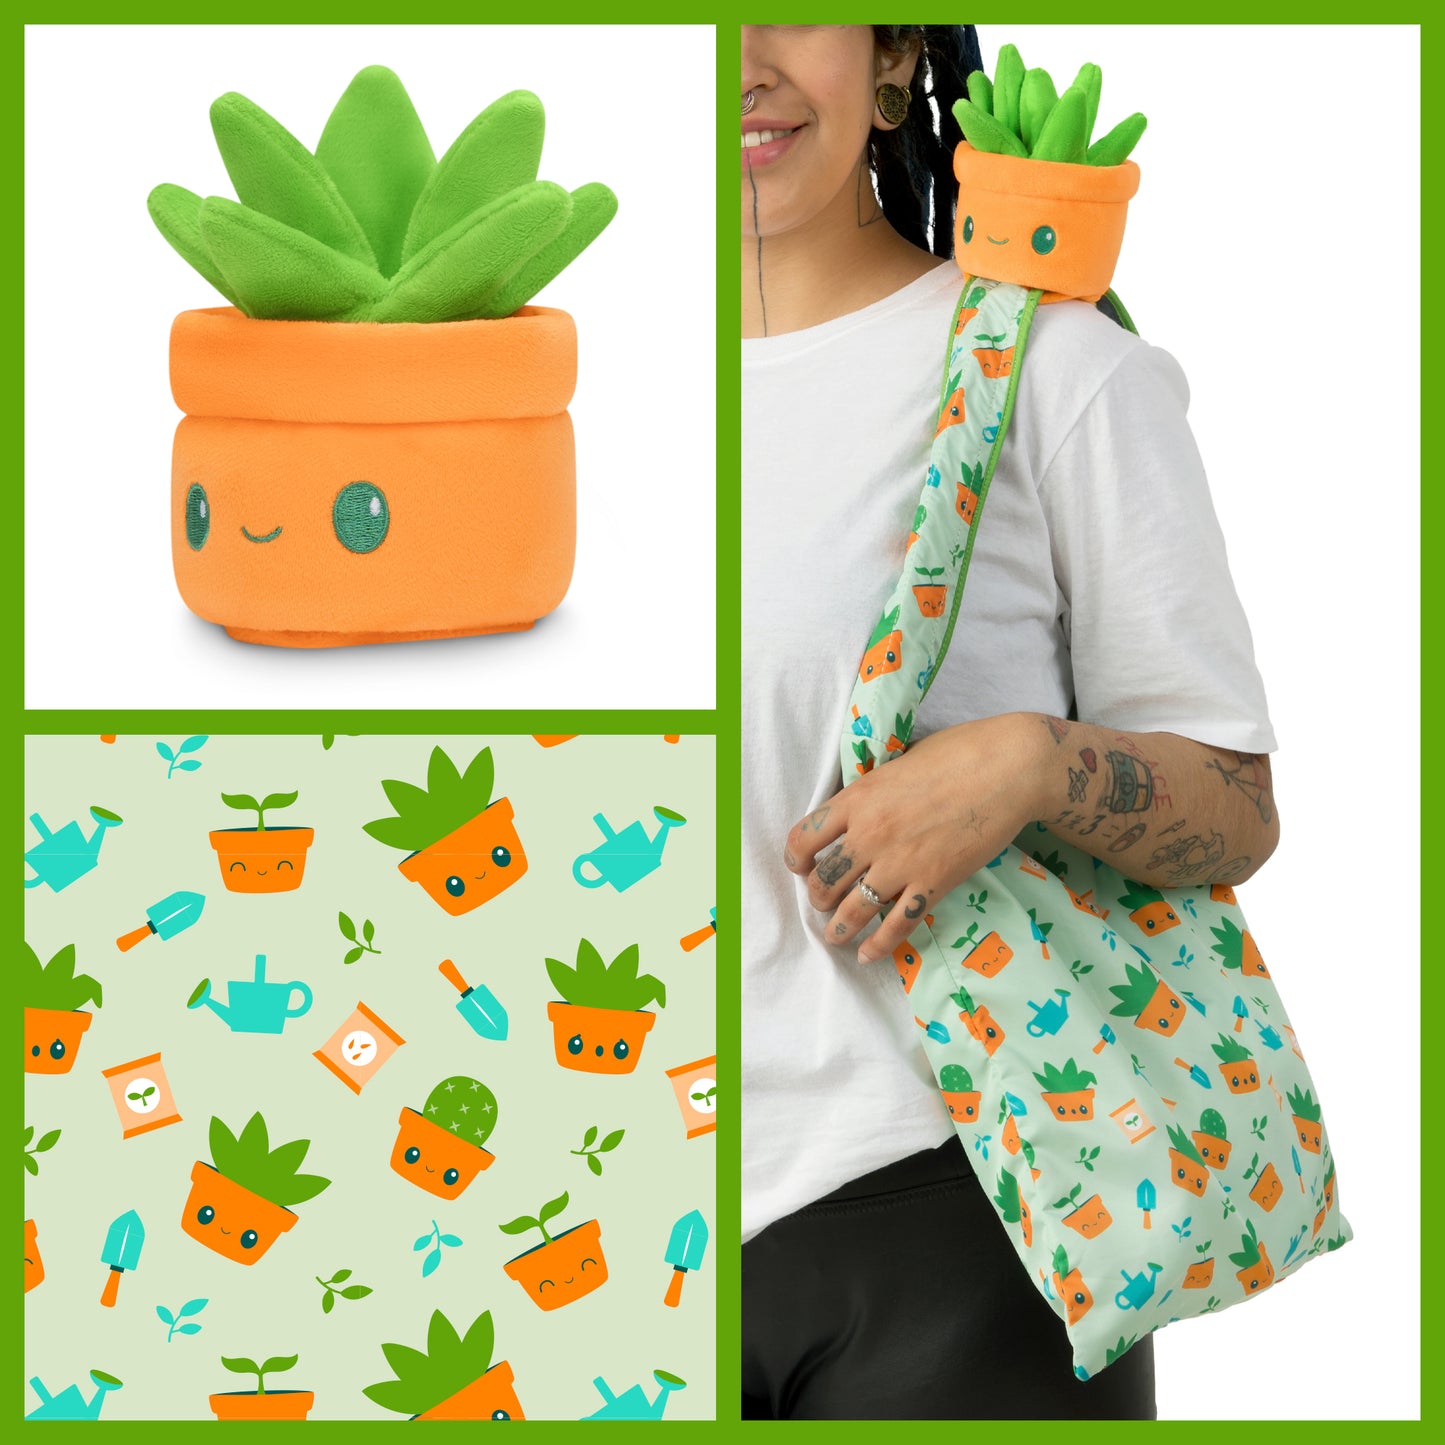 A woman is holding a TeeTurtle Plushiverse Succulent Garden Plushie Tote Bag with a potted plant and TeeTurtle plushies in it.